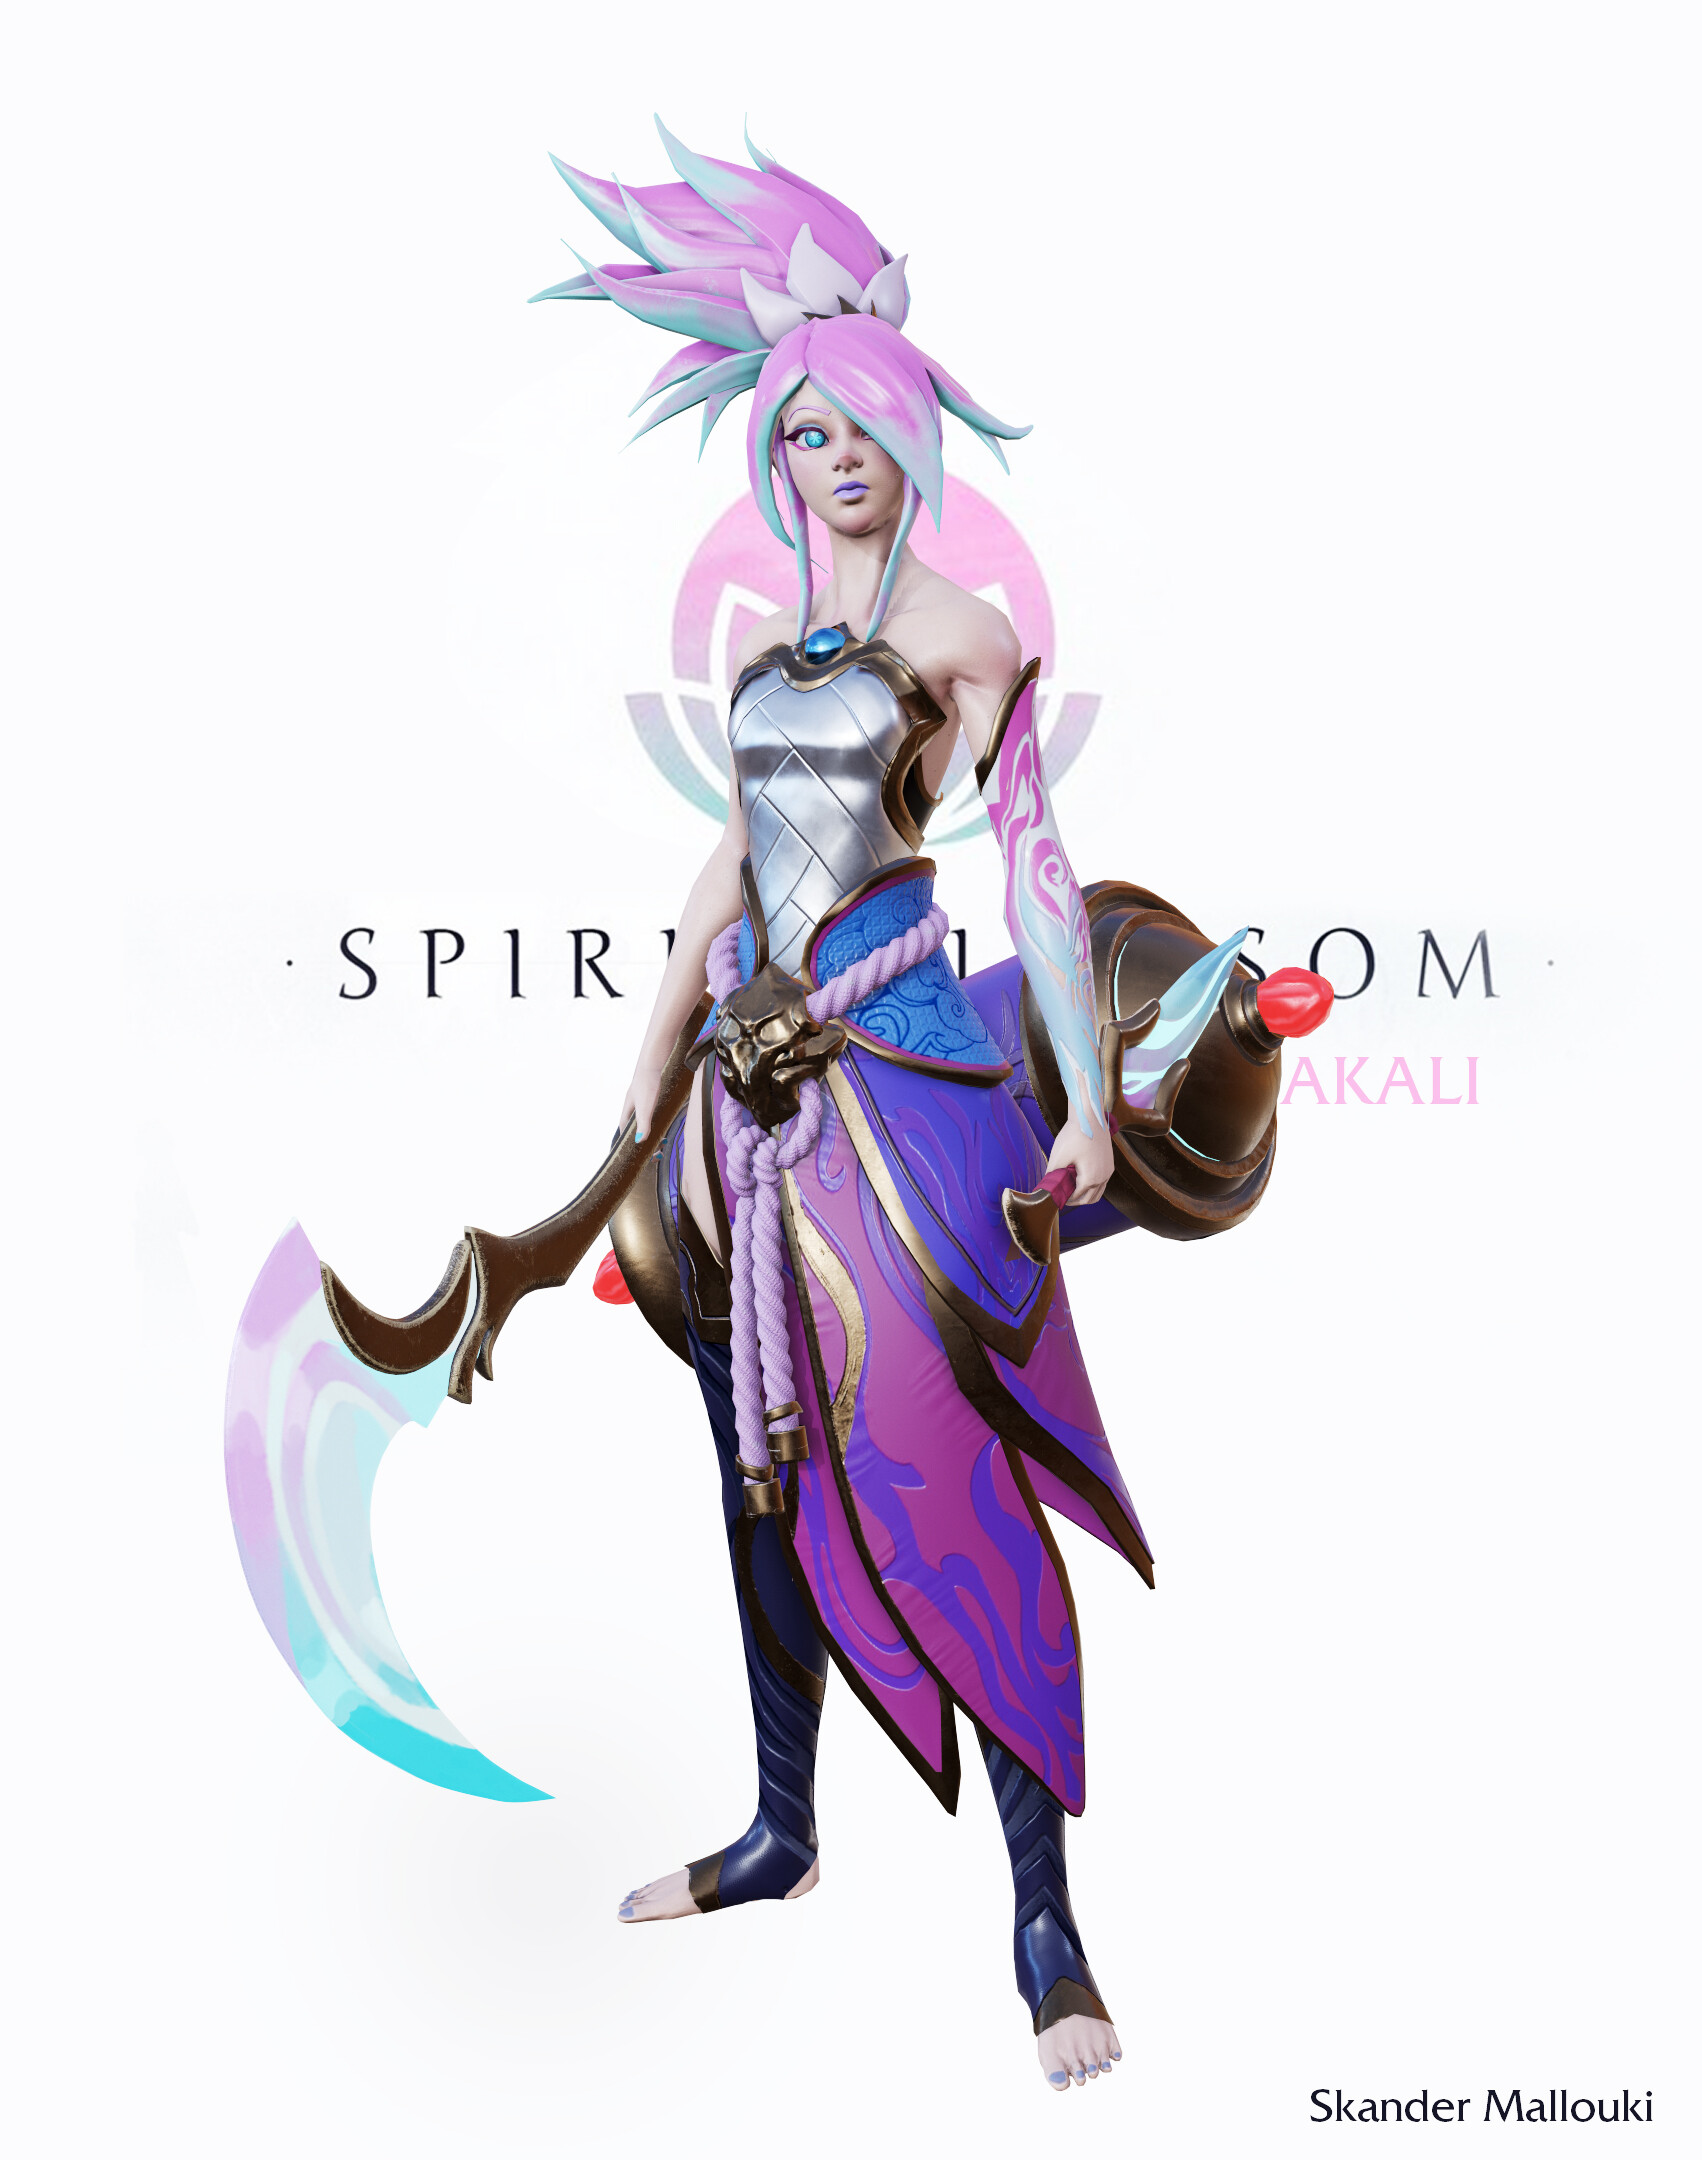 The SPIRIT BLOSSOM got me hyped and mostly the design from KAI CHANG of Aka...